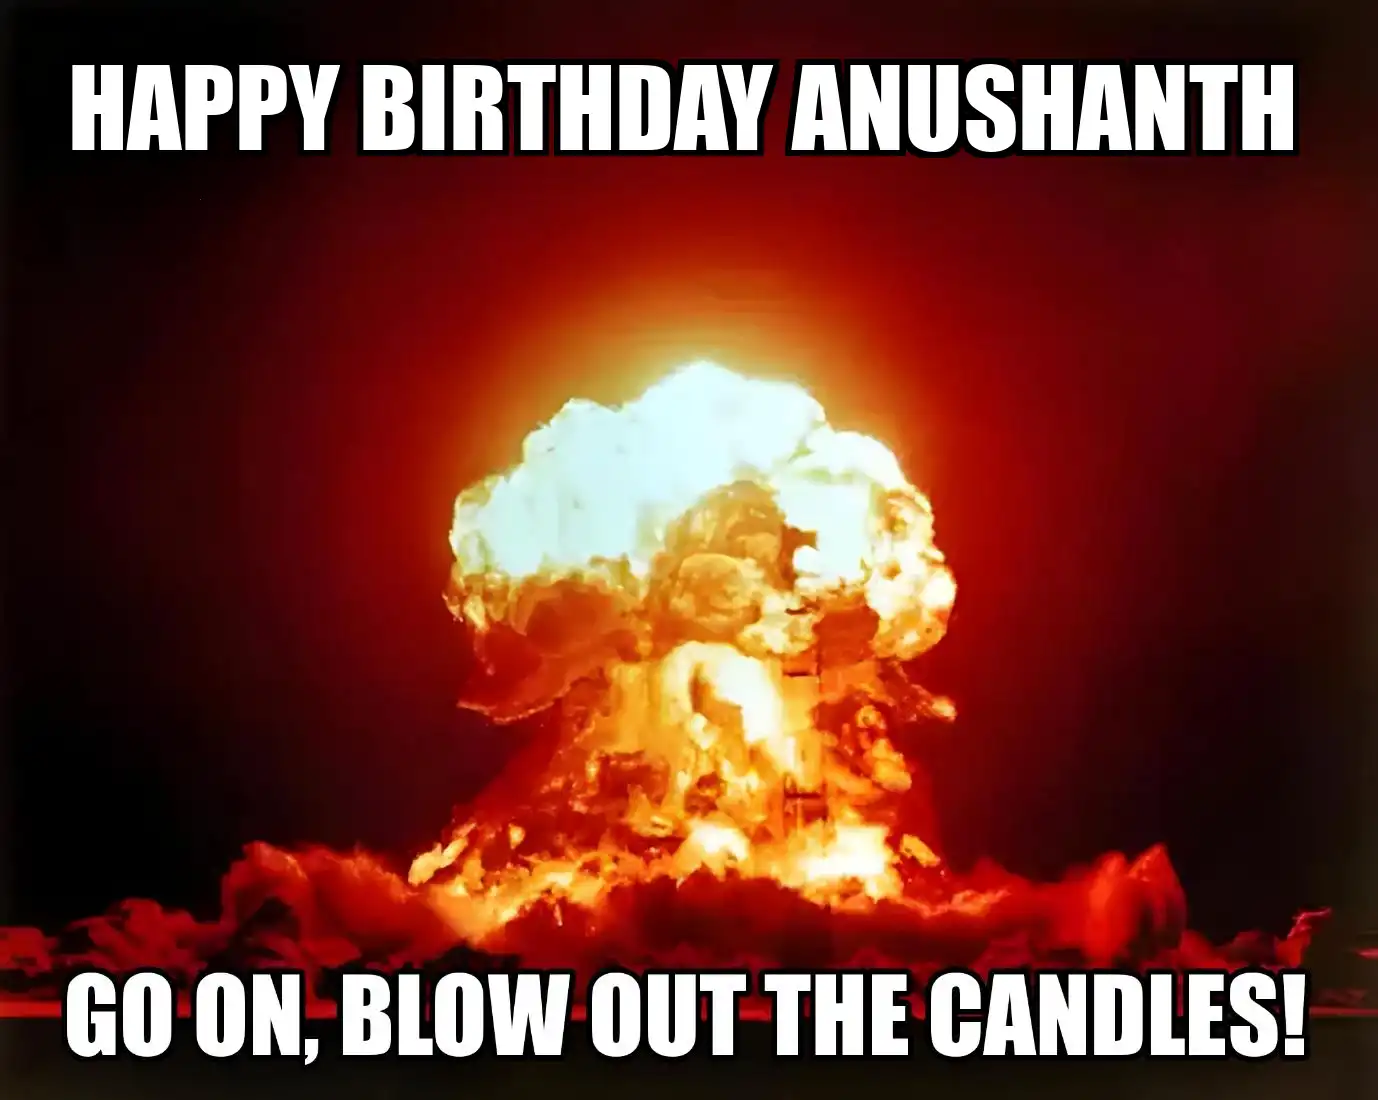 Happy Birthday Anushanth Go On Blow Out The Candles Meme